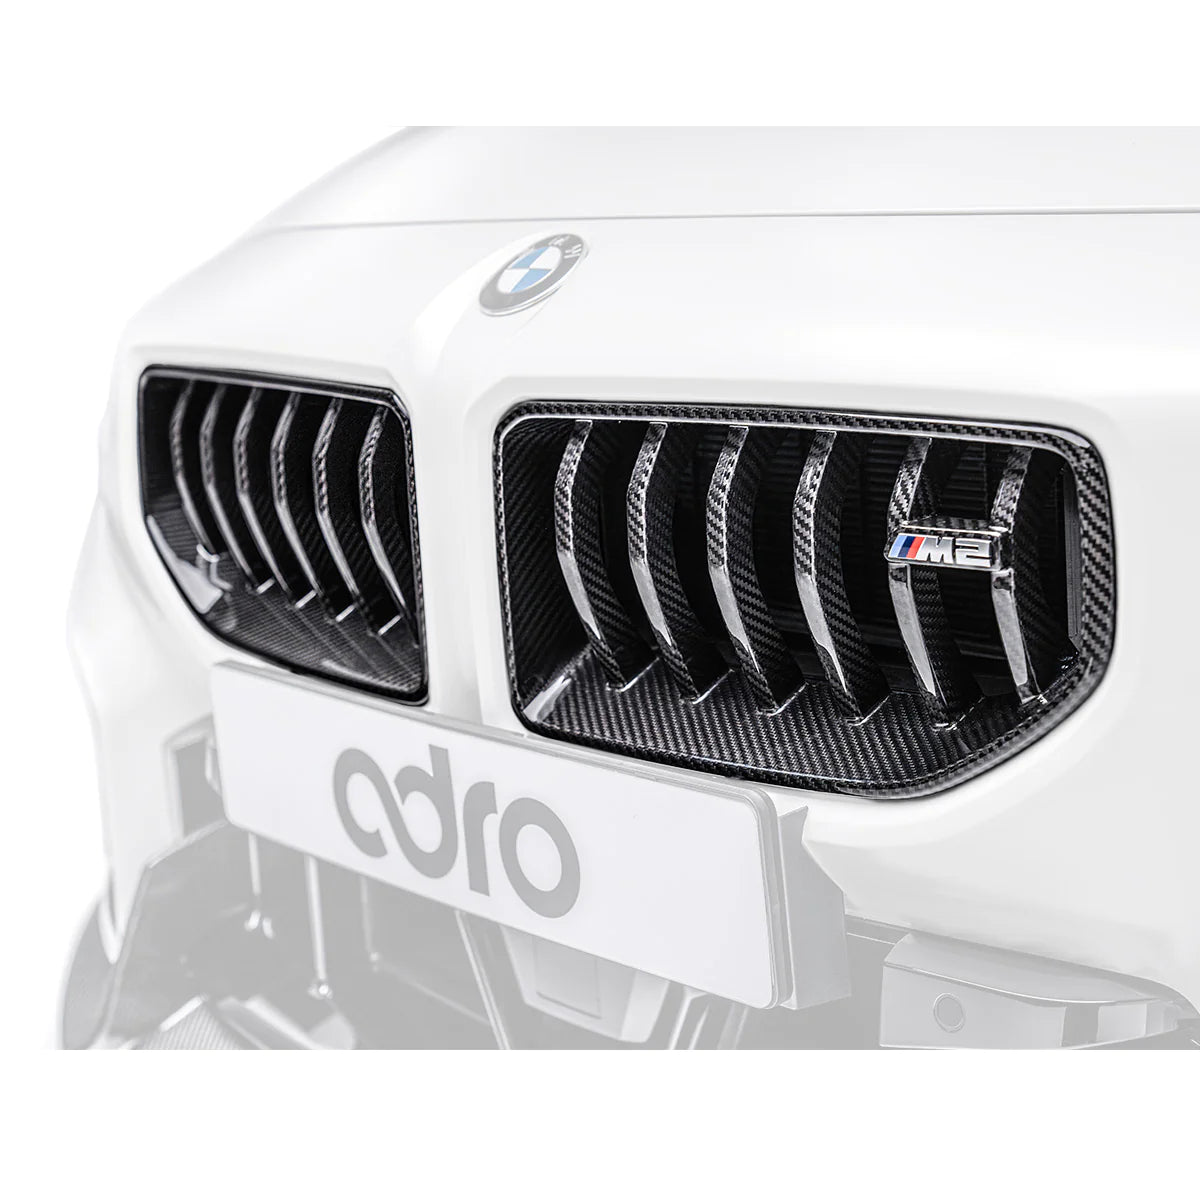 ADRO BMW G87 M2 FRONT GRILLE - PREORDER NOW! DUE JAN 2024